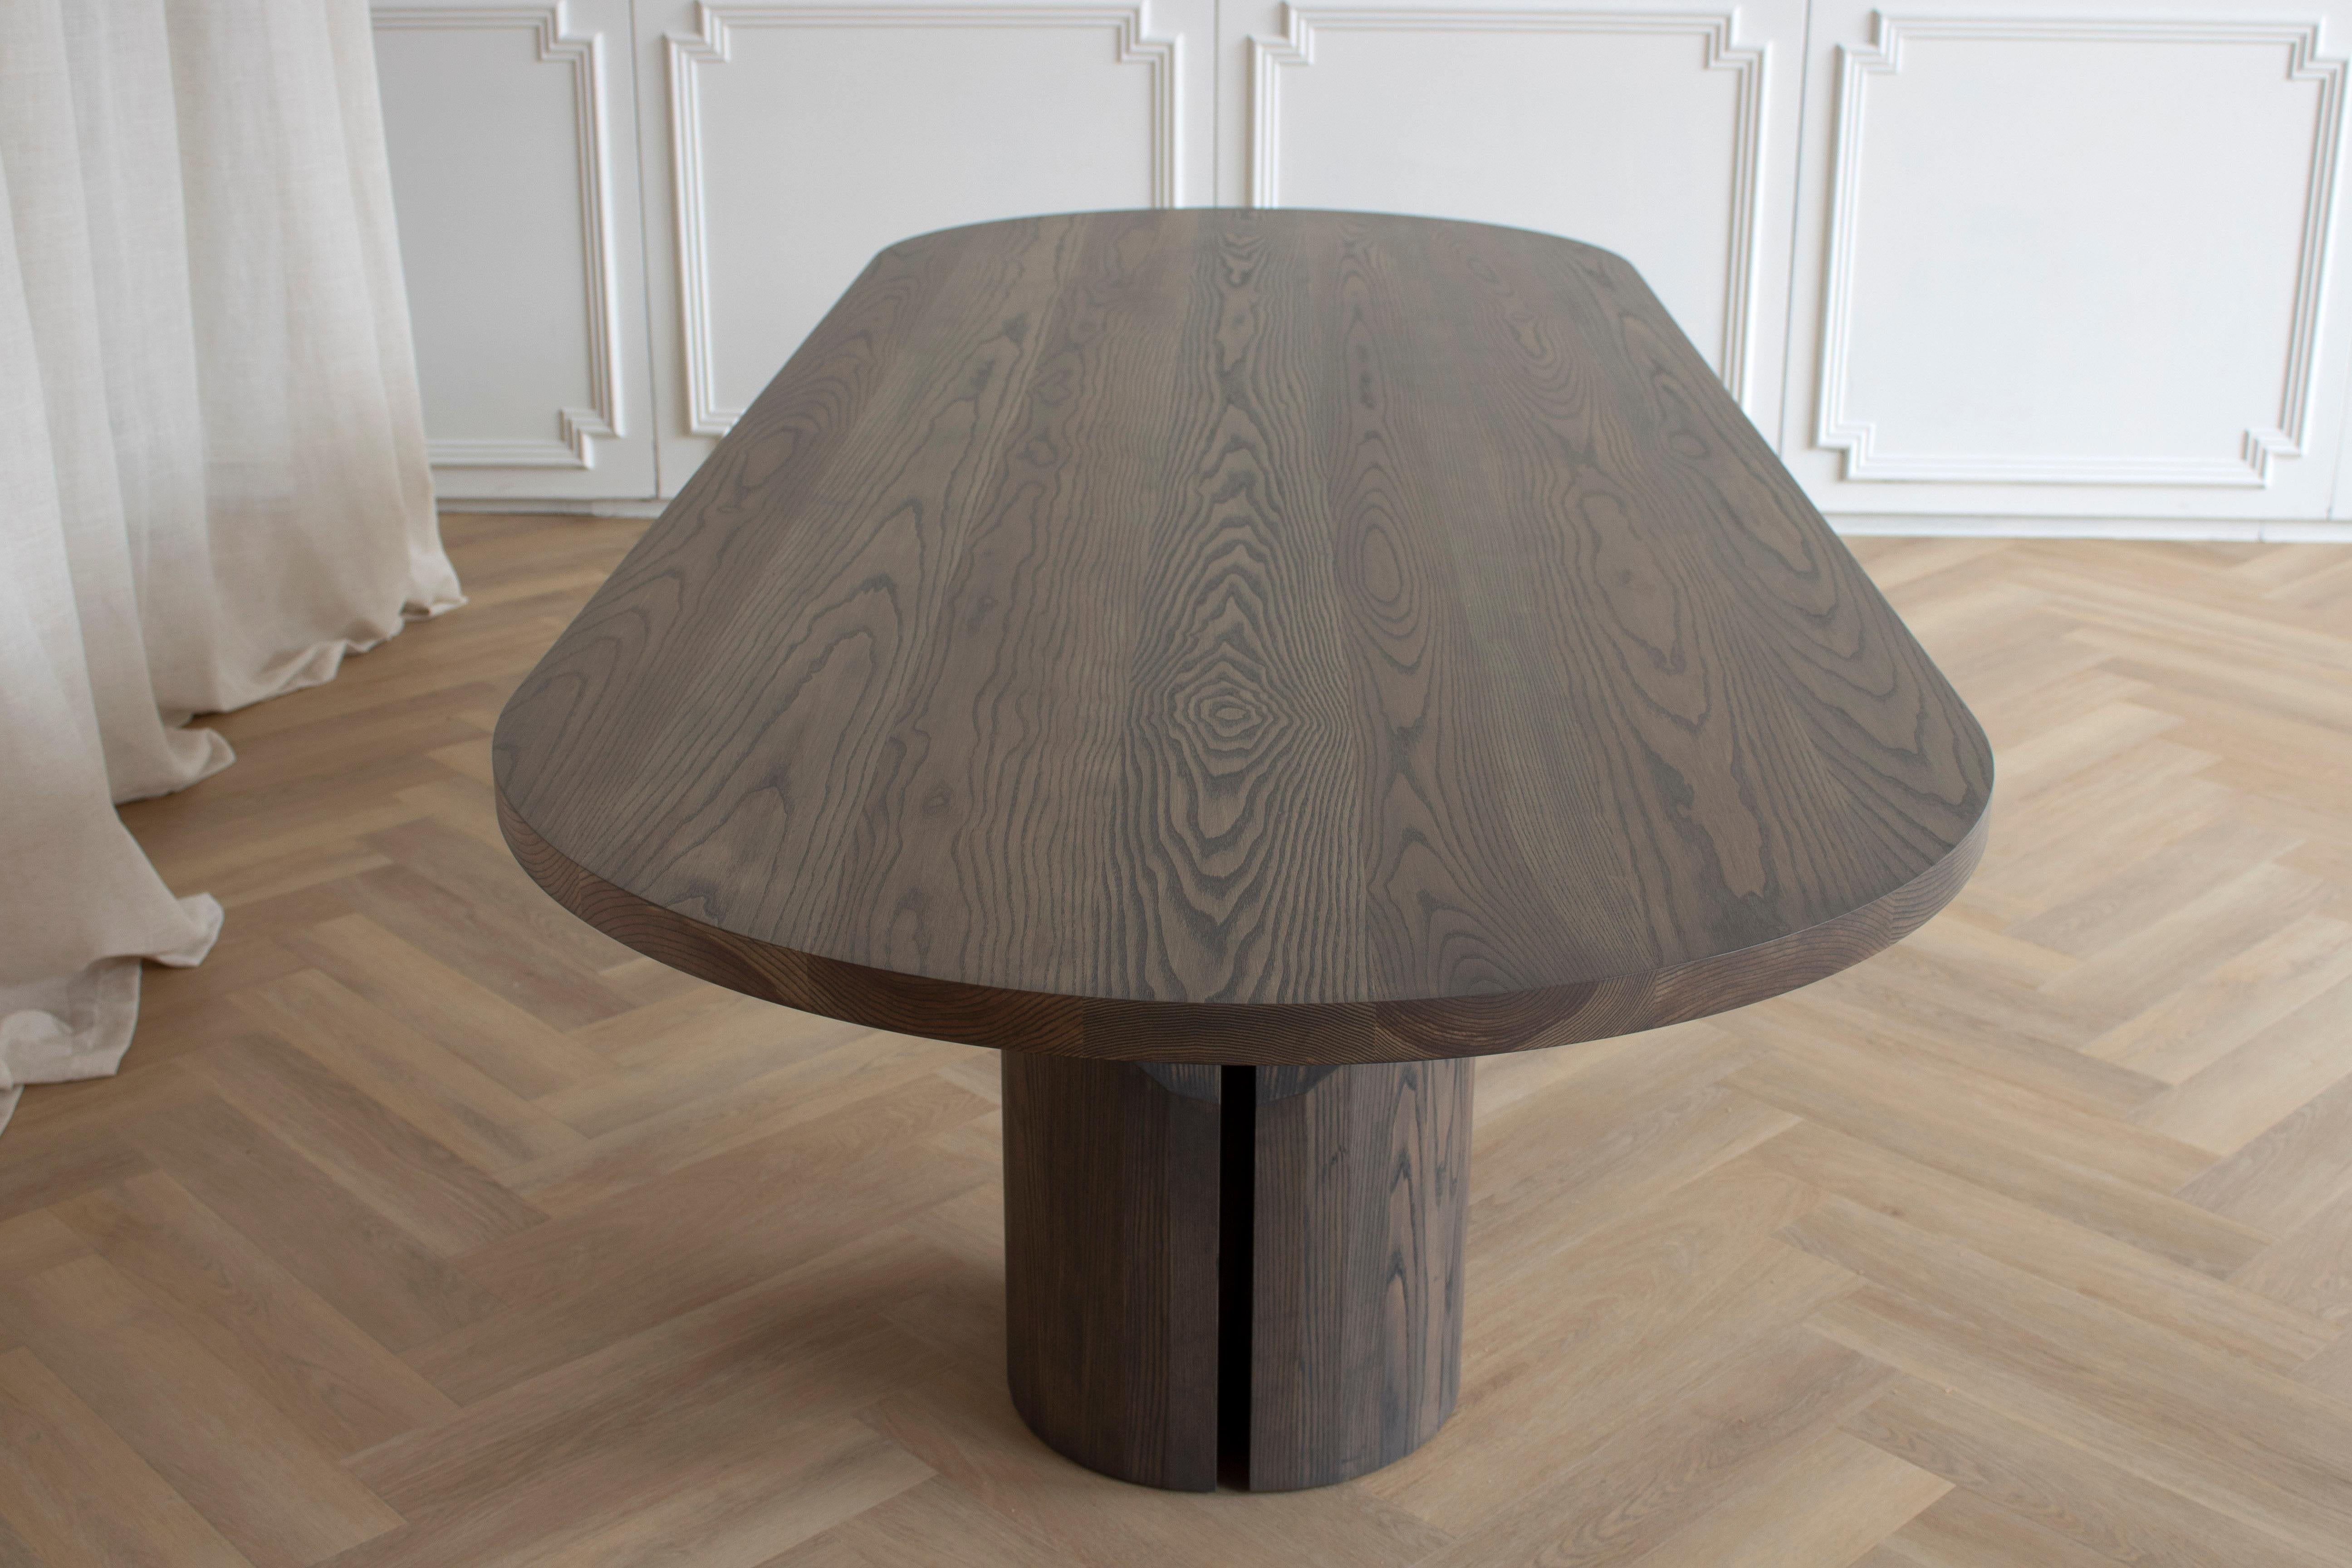 Constructed from solid wood and built to last for generations our Barrow Dining Table pushes the boundaries of what is possible with solid wood construction. The design at this 120